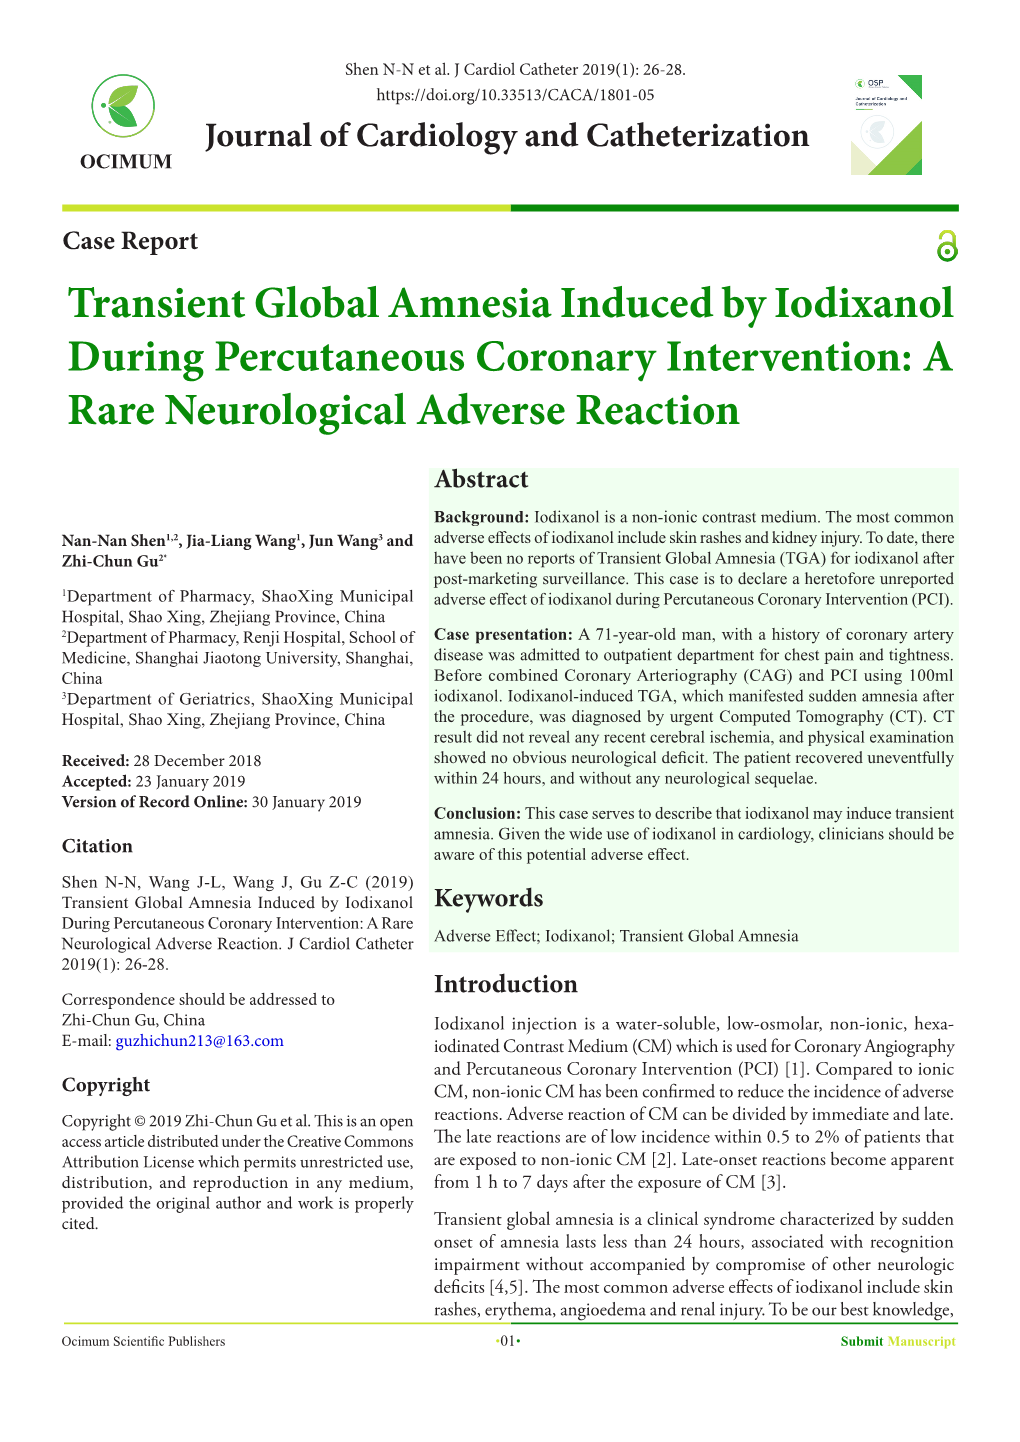 Transient Global Amnesia Induced by Iodixanol During Percutaneous Coronary Intervention: a Rare Neurological Adverse Reaction